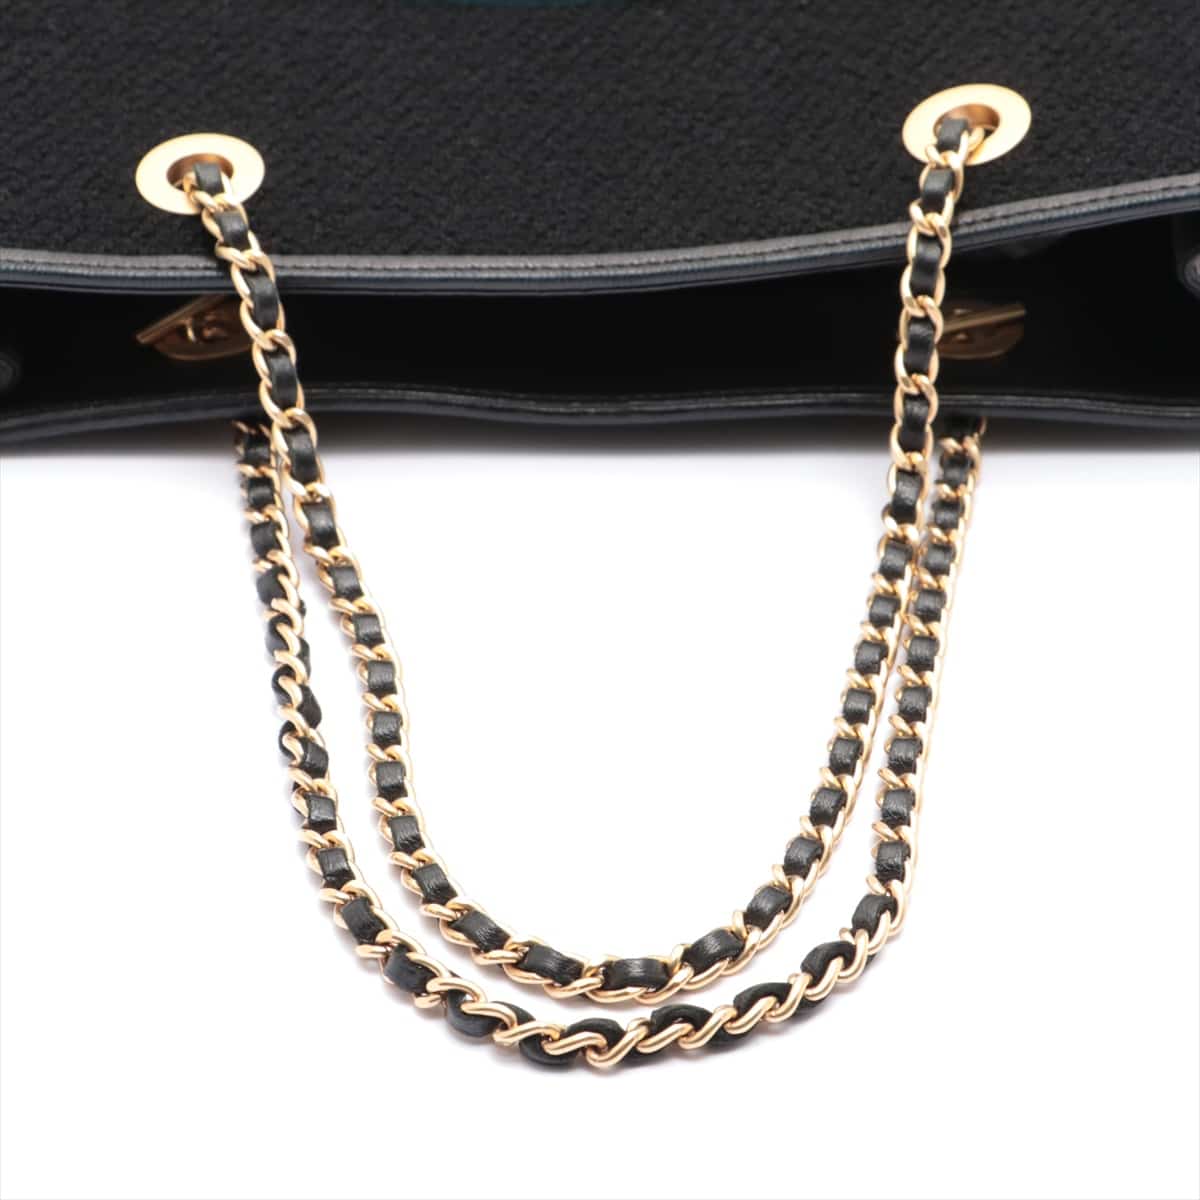 Chanel Coco Mark canvas Chain tote bag Lady Black Gold Metal fittings 7XXXXXX